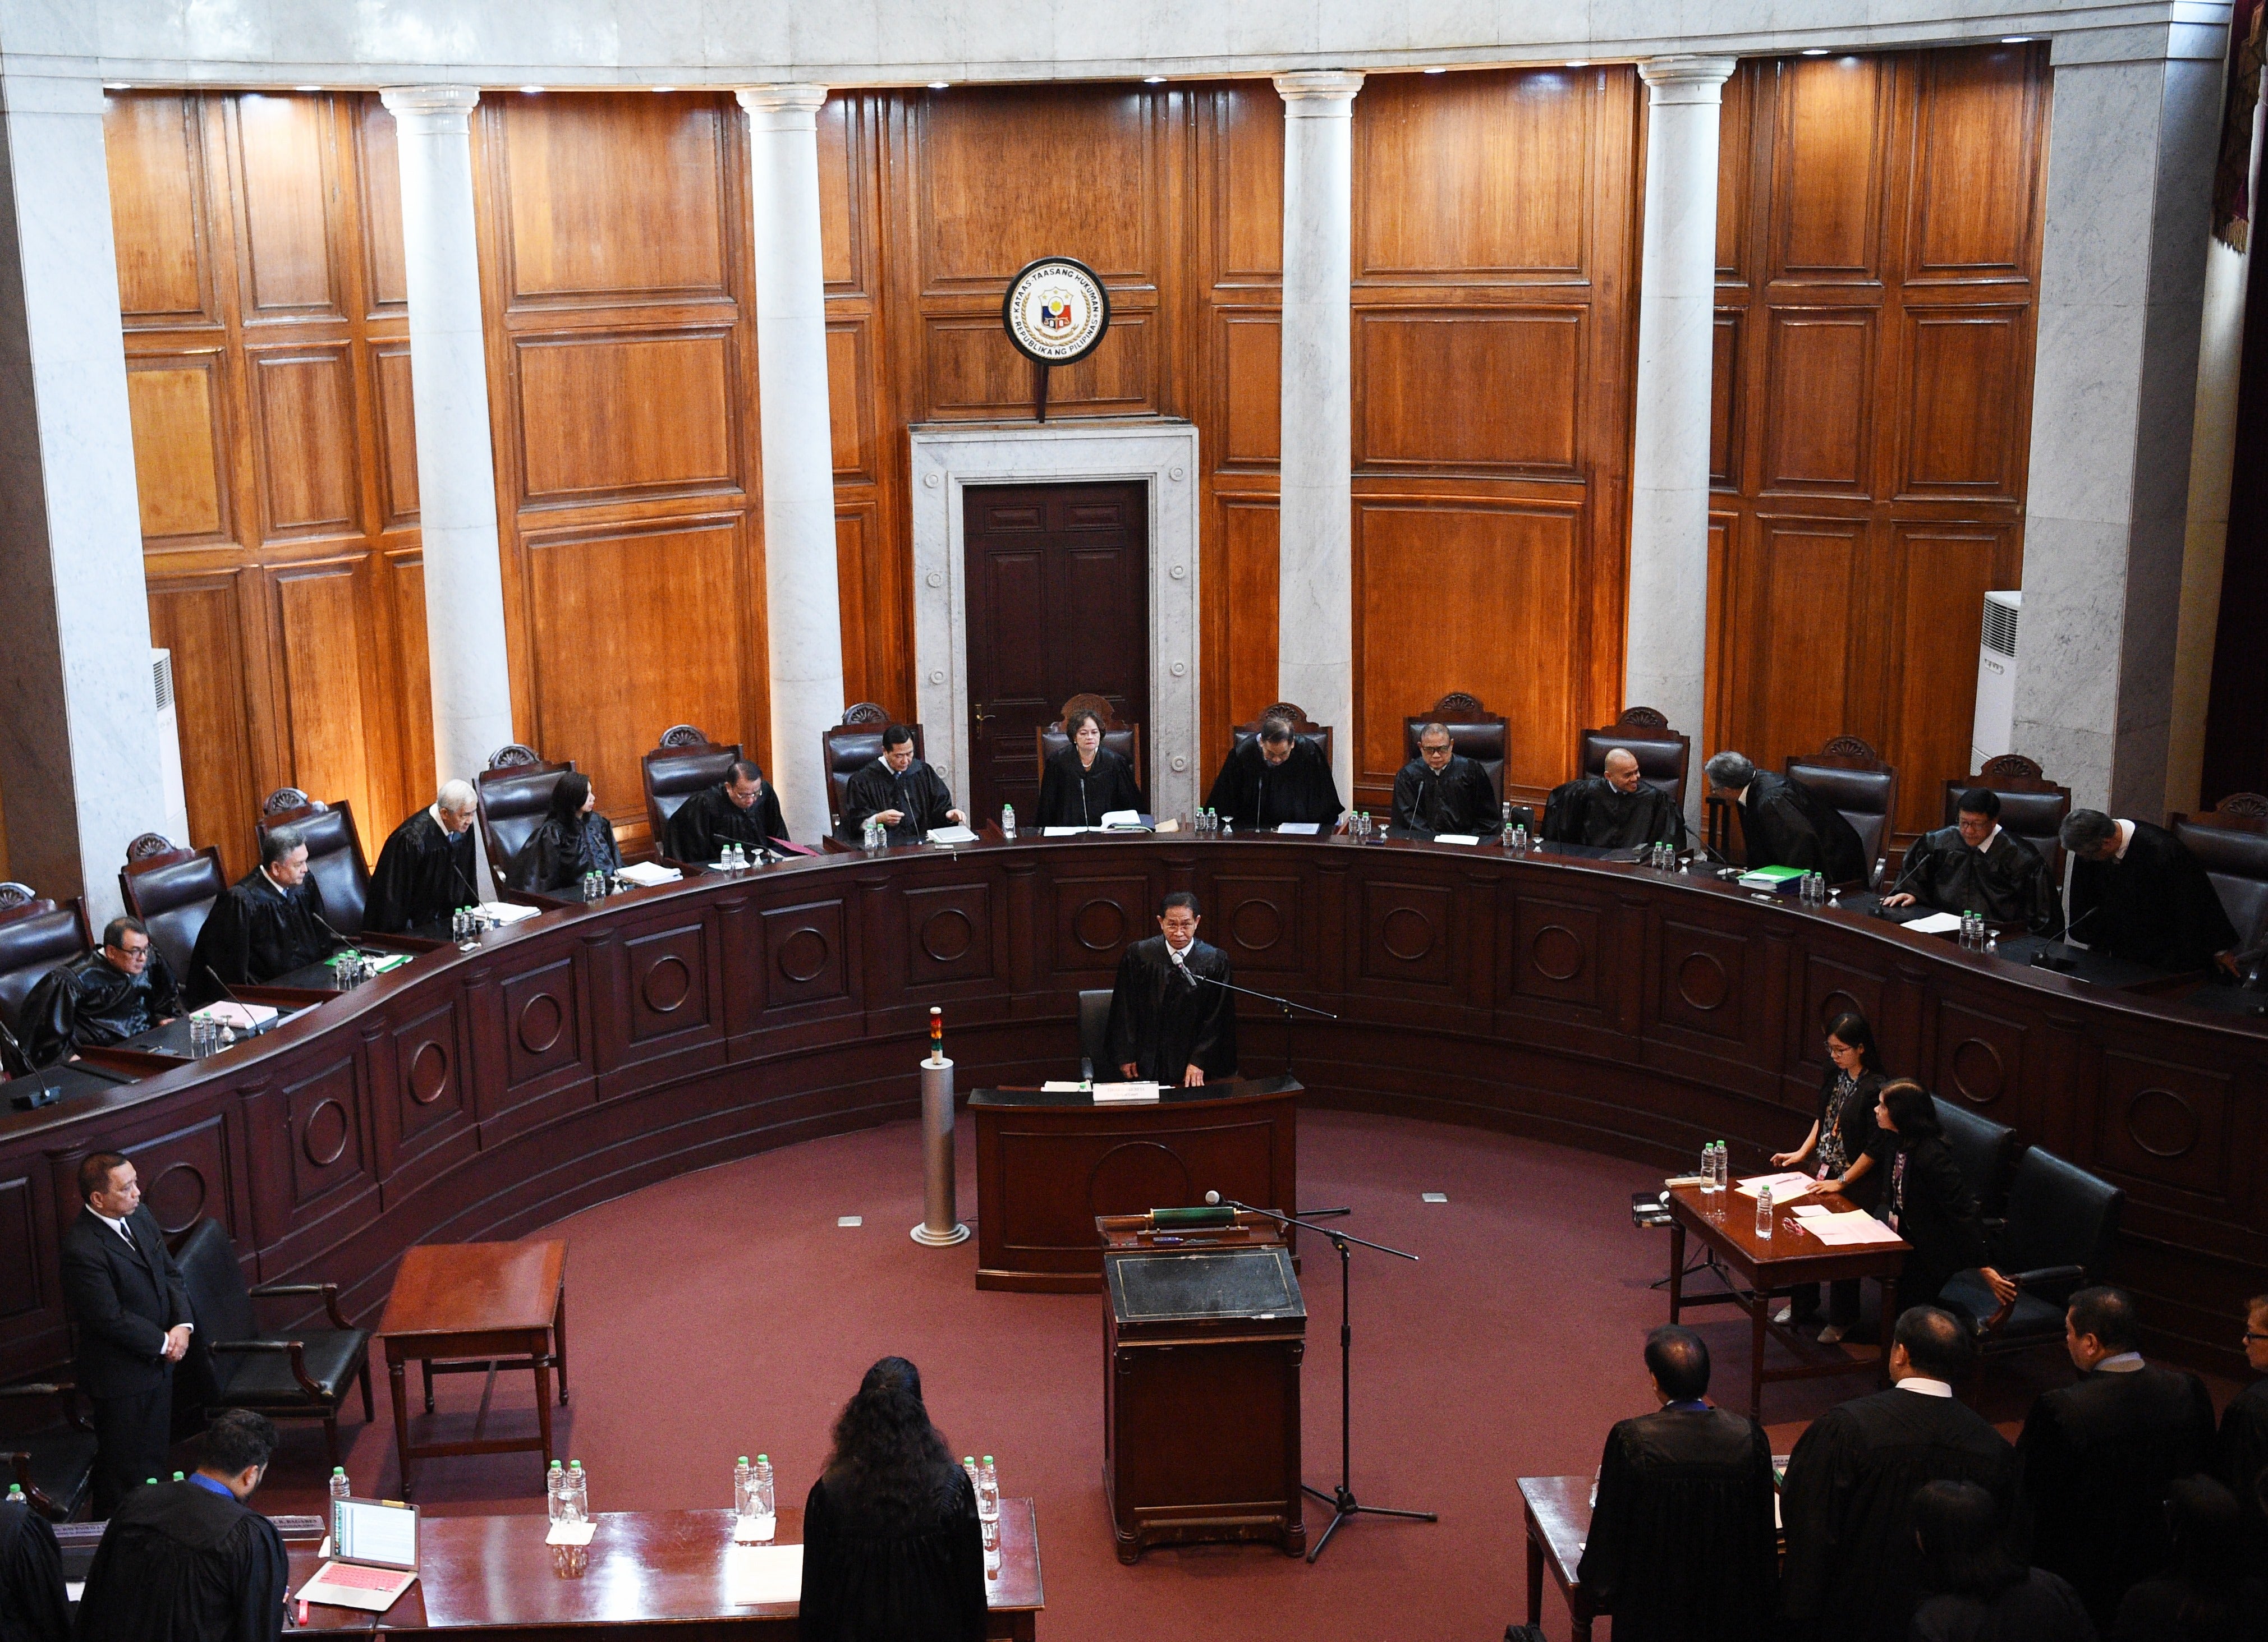 File: Members of the Supreme Court of the Philippines on 28 August 2018